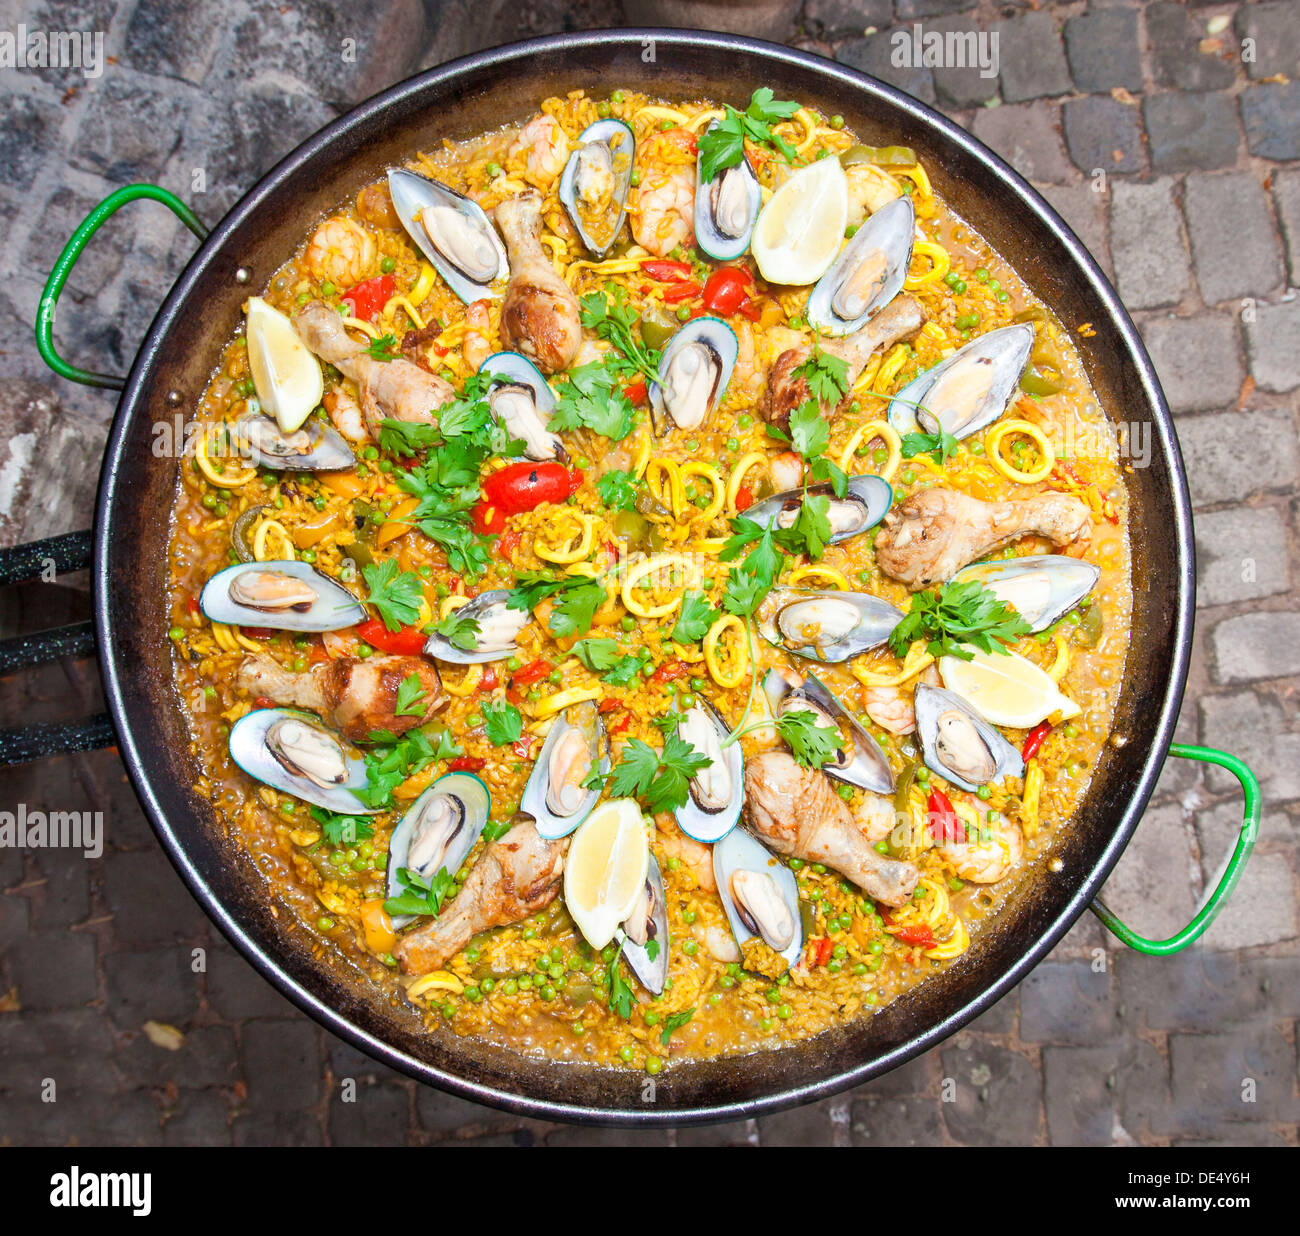 Paella, a Spanish rice dish with seafood and chicken, series, no. 7 Stock Photo